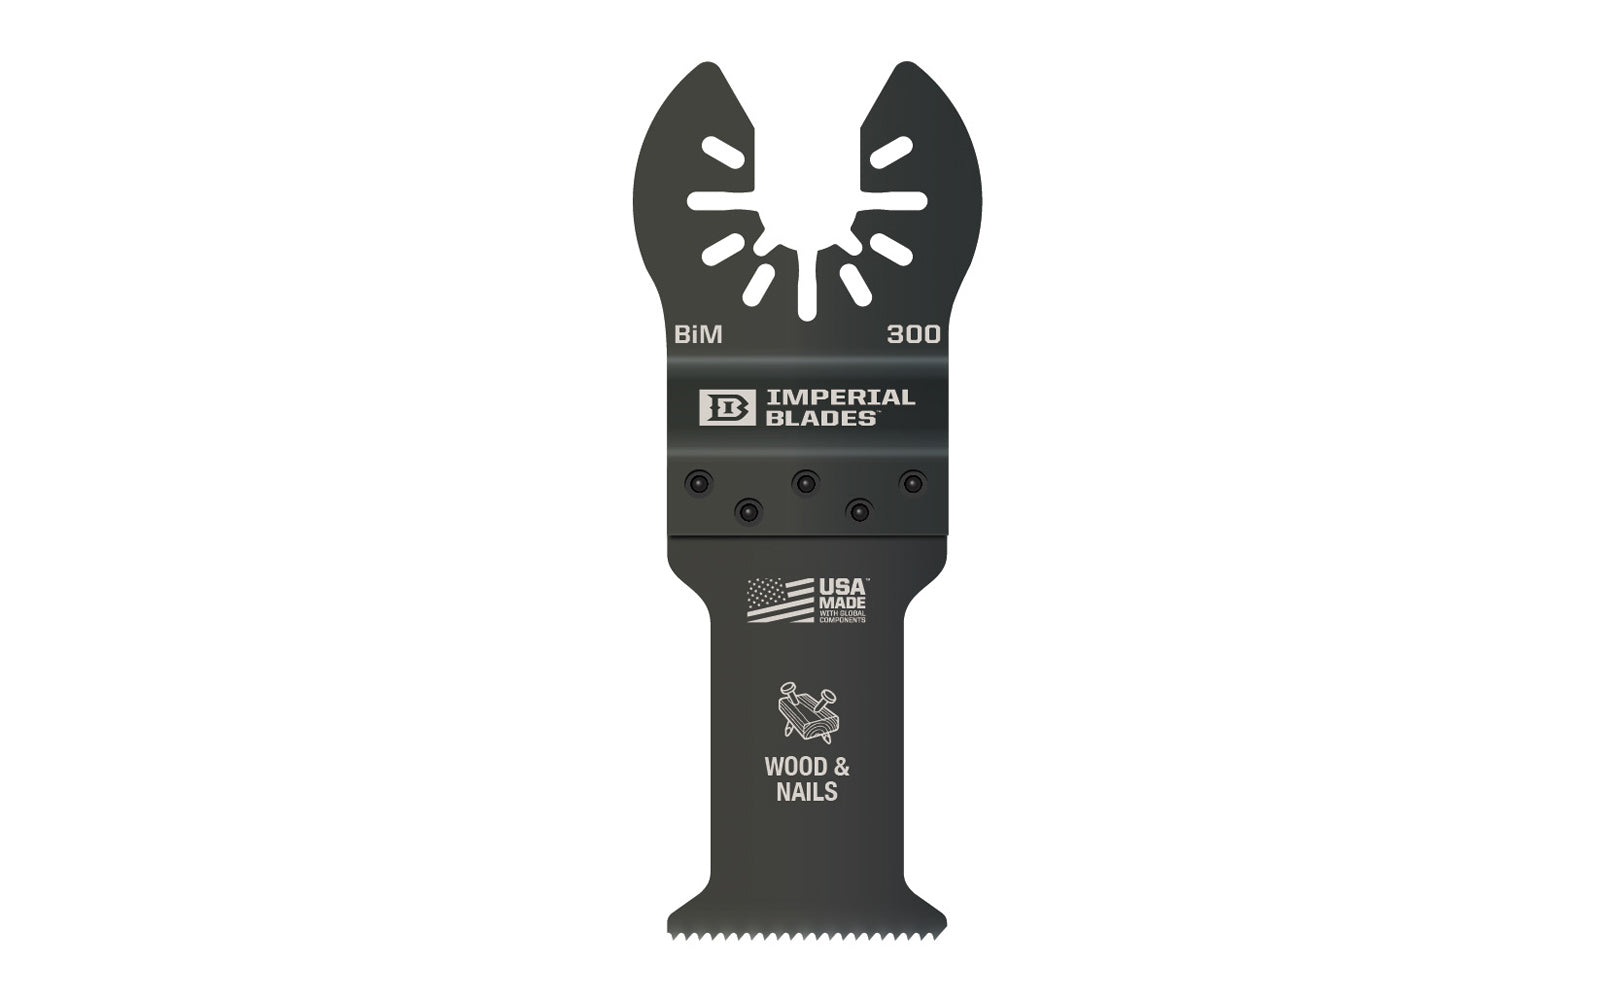 Imperial Blades "One Fit" 1-1/4" Standard Wood & Nails Blade 1 PC is a Bimetal blade with teeth set for Wood & Nails, Copper Pipe, Wood, PVC, Drywall. Blade Width: 1-1/4" (32 mm). Blade Depth: 1-5/8" (41 mm). Standard Wood & Nails Blade - BiM blade. Model No. IBOA300-1. 819846010247. BiM blade